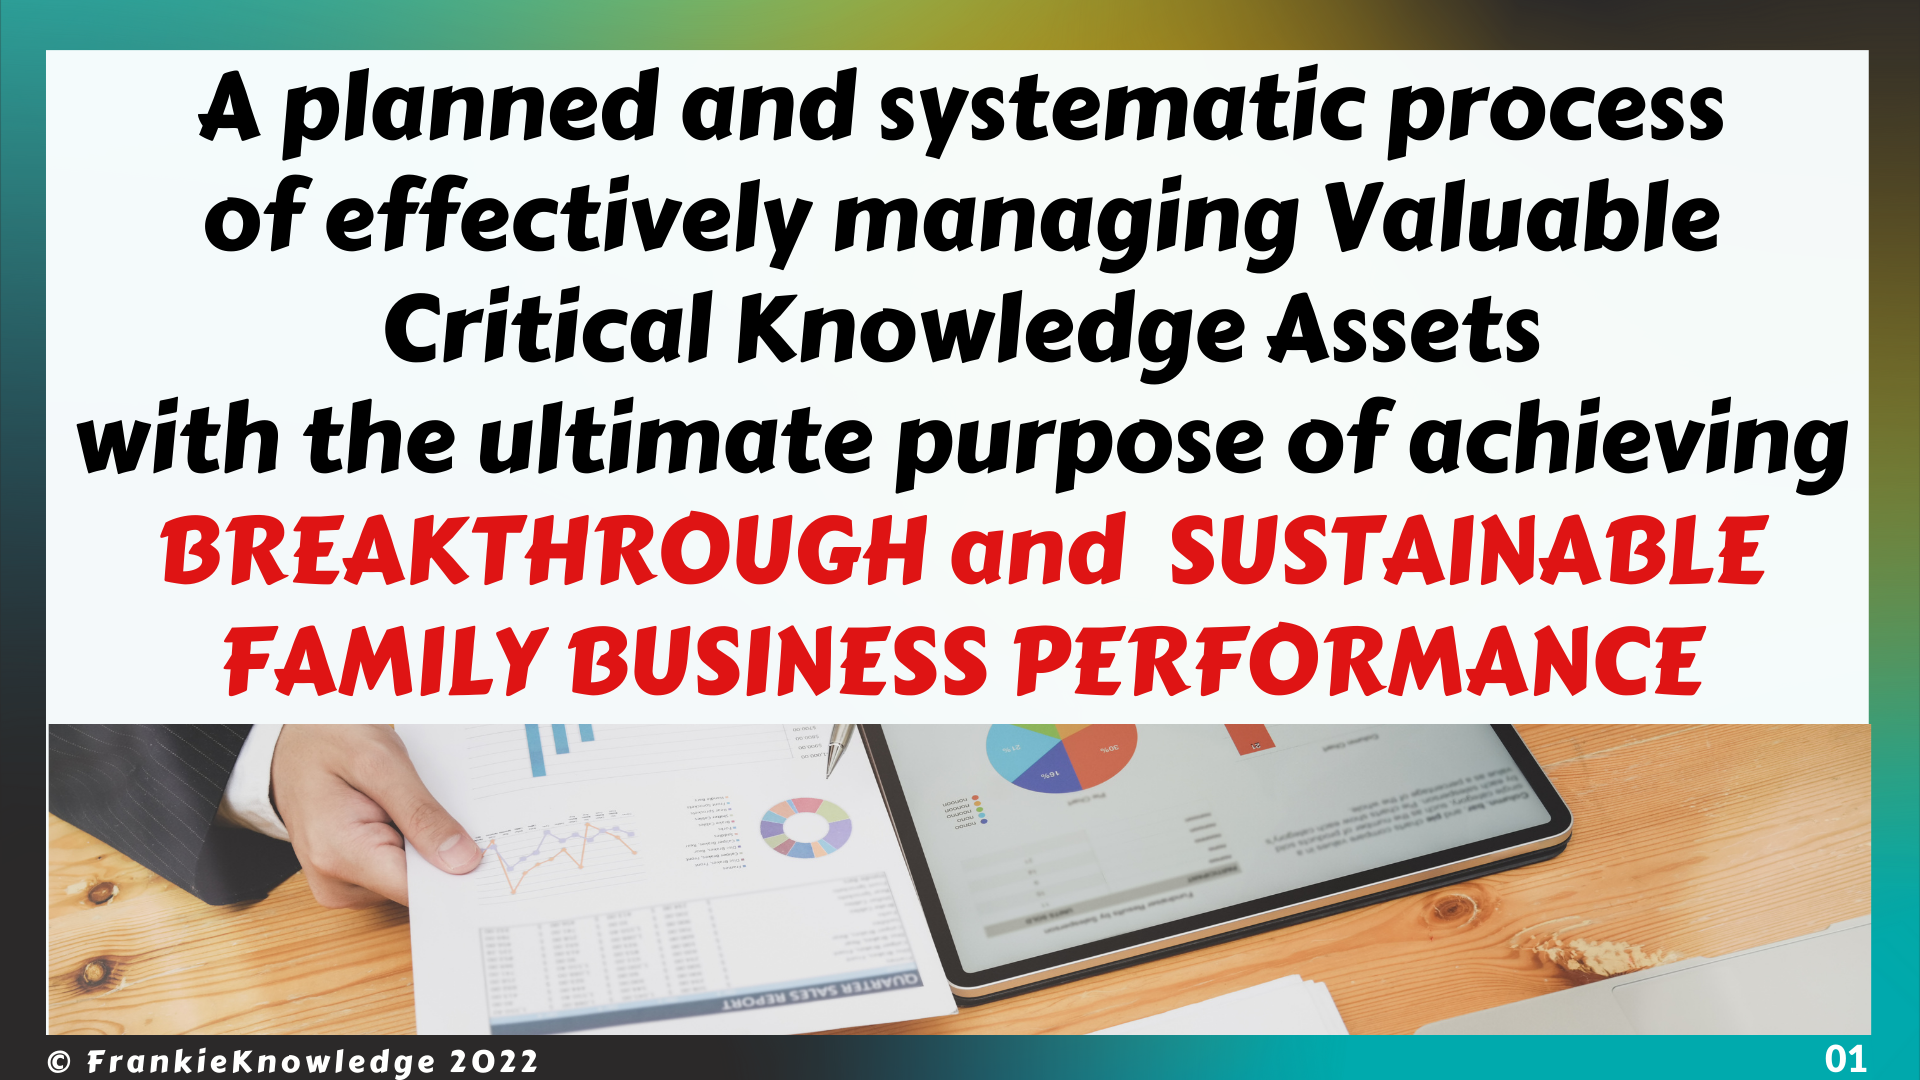 A planned and systematic process of effectively managing Valuable Critical Knowledge Assets with the ultimate purpose of achieving BREAKTHROUGH and  SUSTAINABLE FAMILY BUSINESS PERFORMANCE